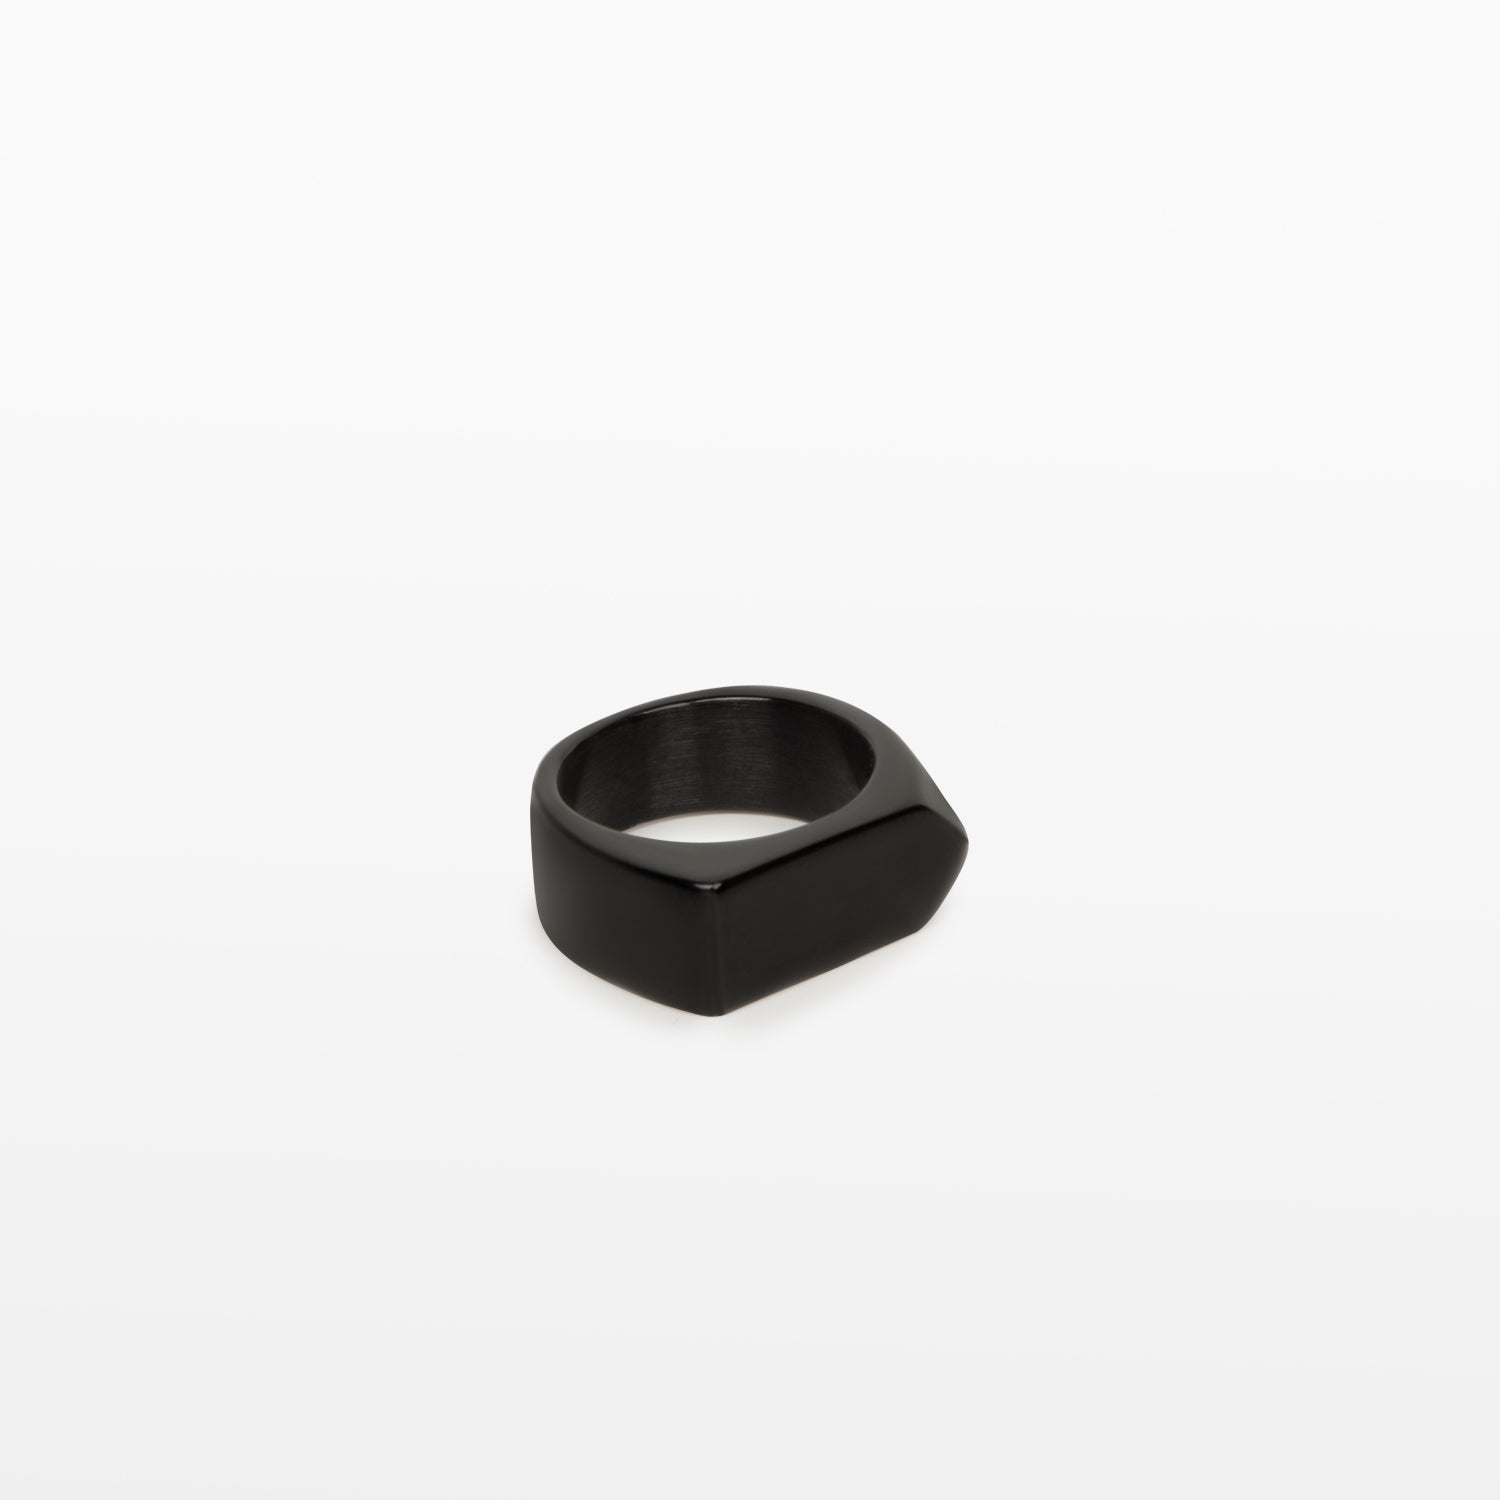 Image of the Pointed Band Ring in Black is made using stainless steel and has a width of 8mm. Its superior construction provides lasting durability and protection from water damage and tarnishing.